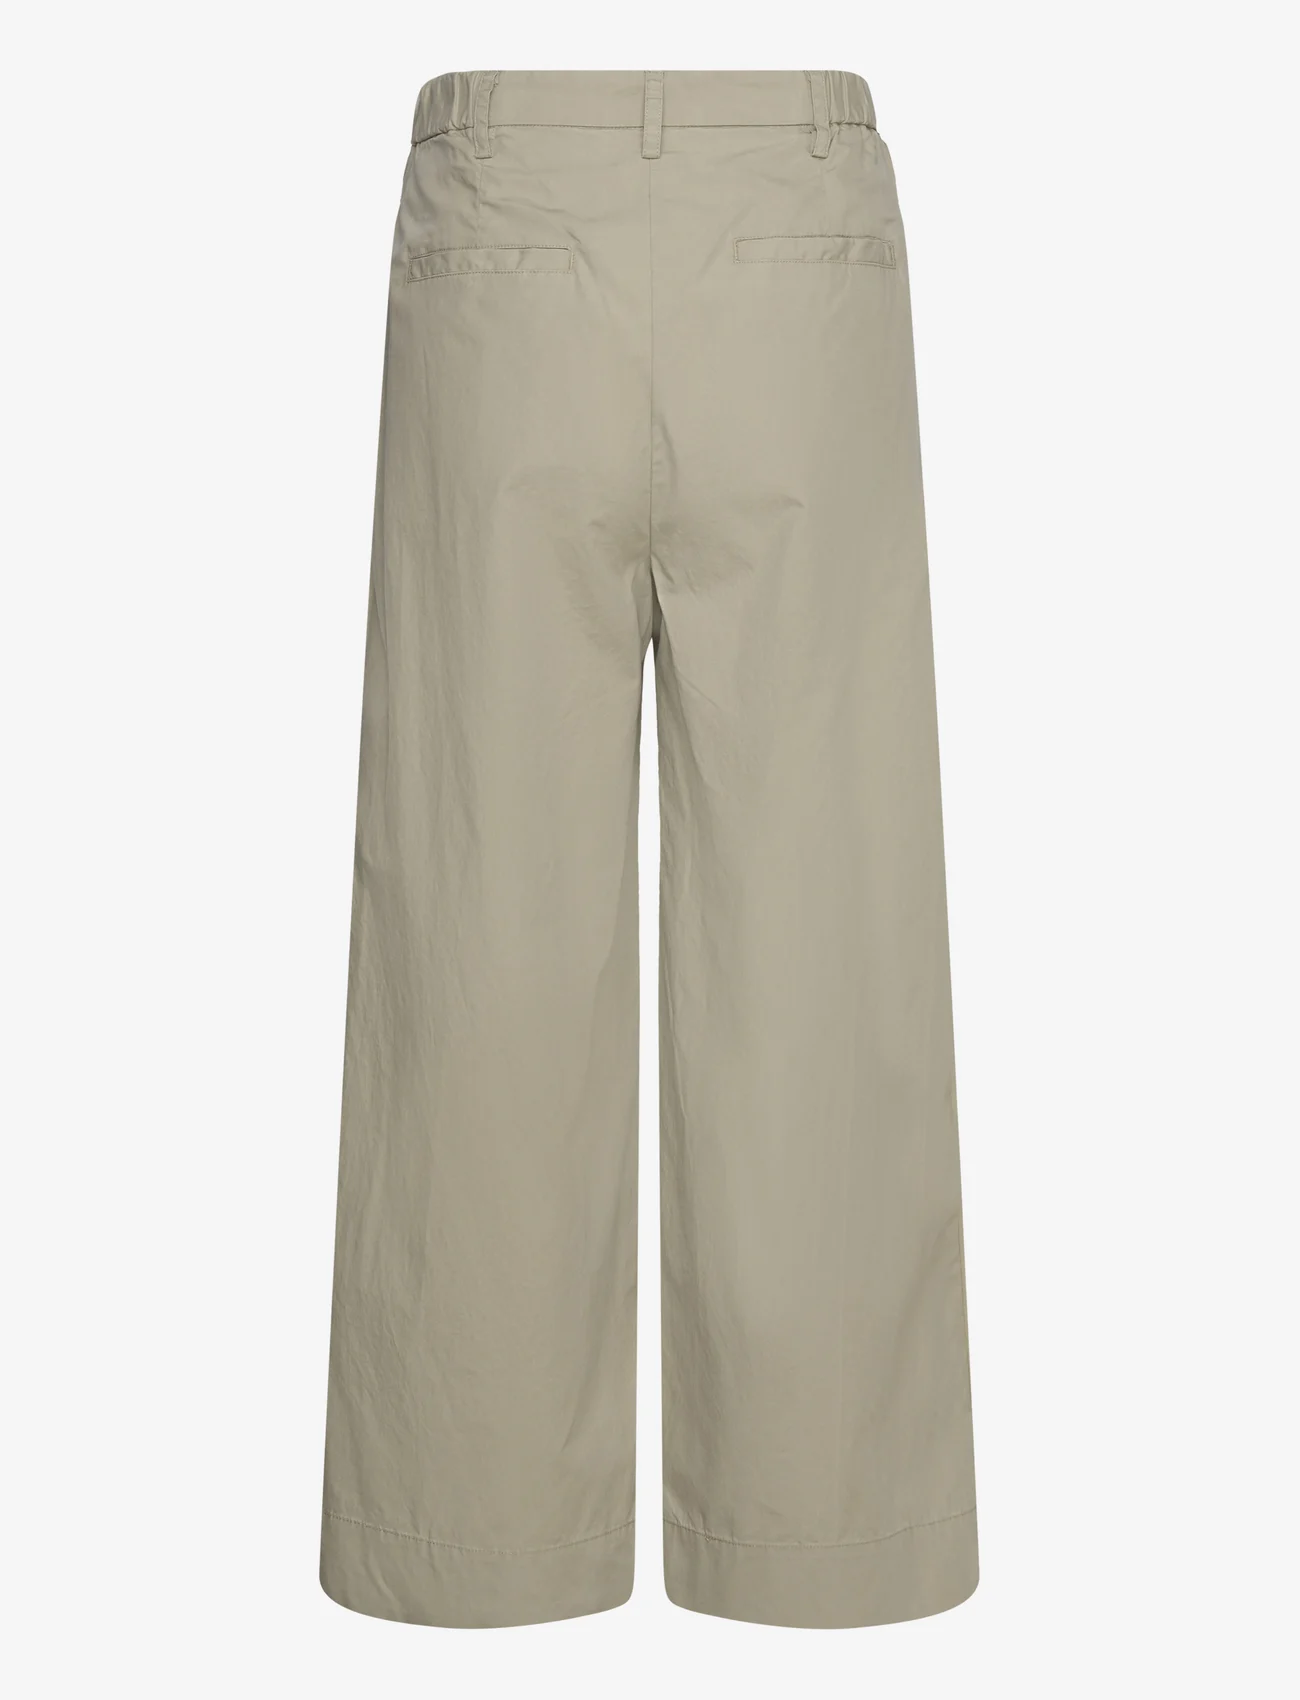 HOLZWEILER - Cyra Trousers - chinos - green - 1